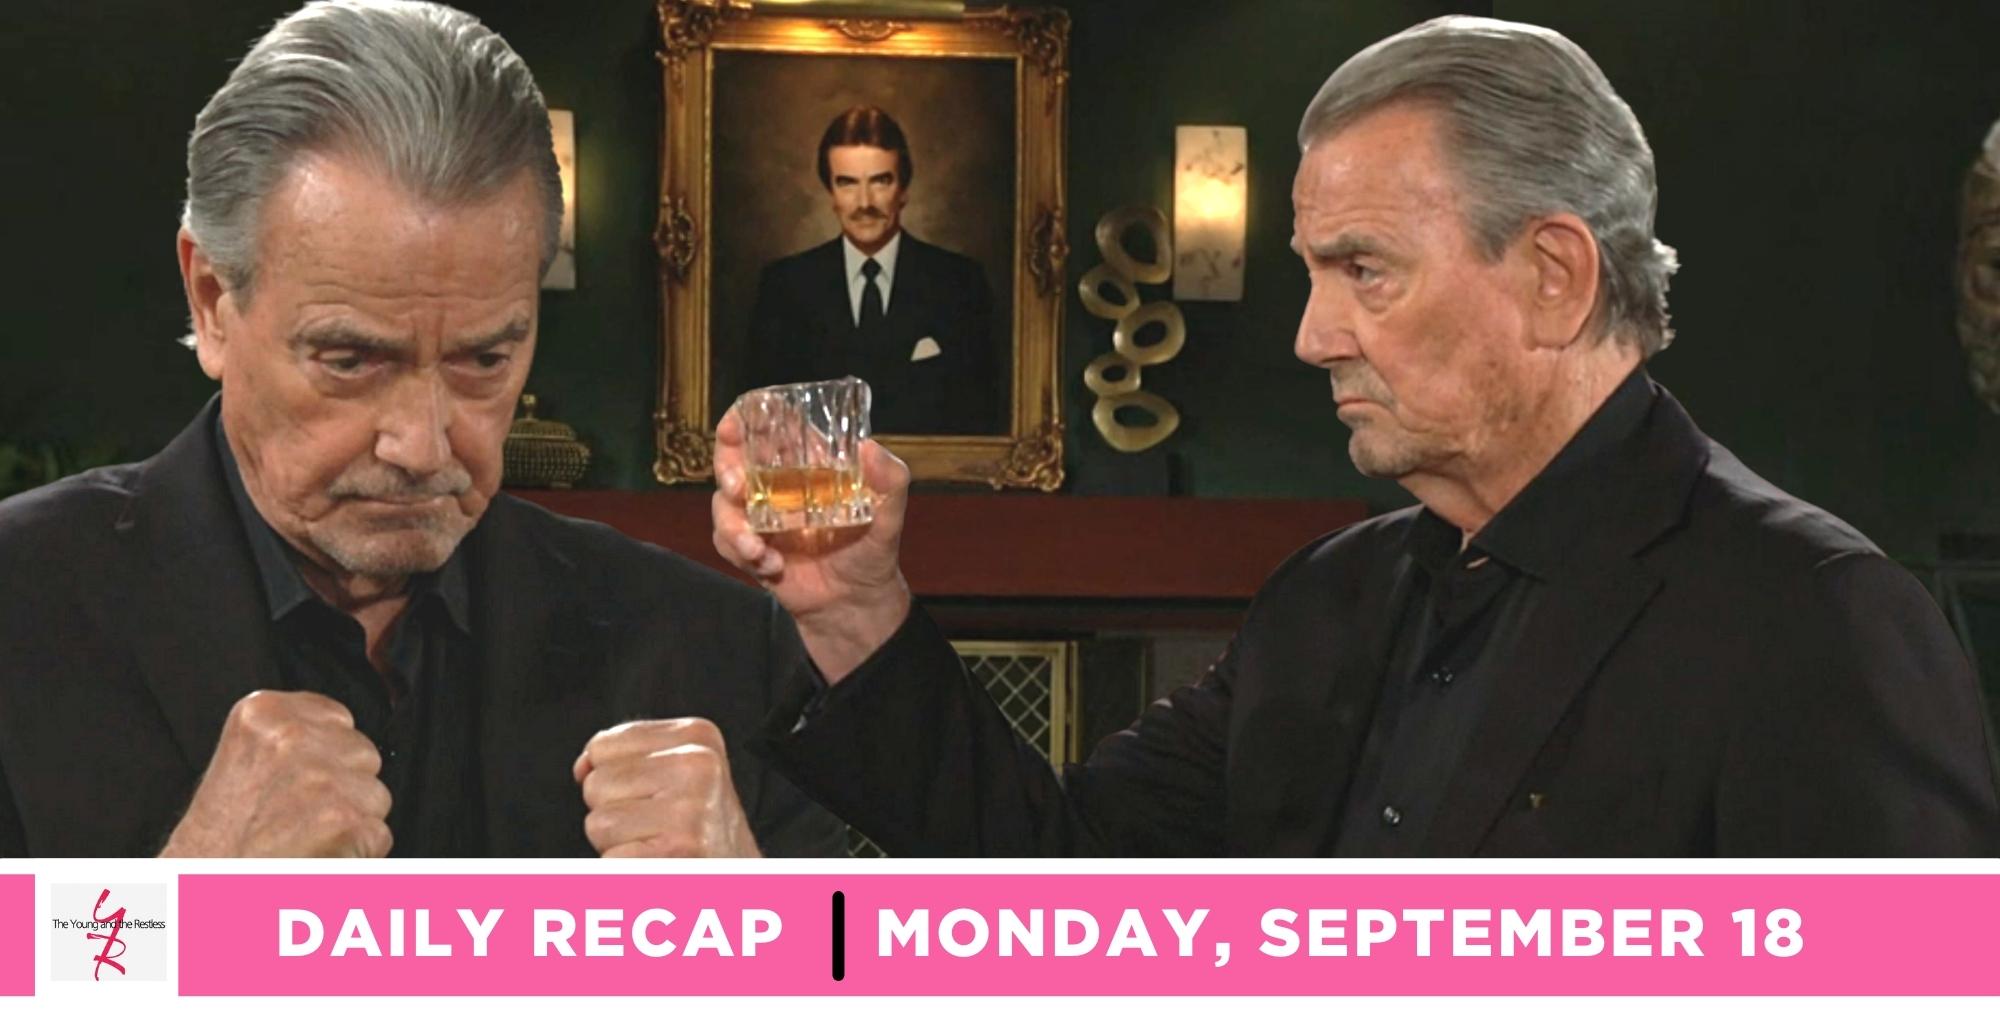 young and the restless recap for september 18, 2023, has two images of victor newman and his portrait on the wall.